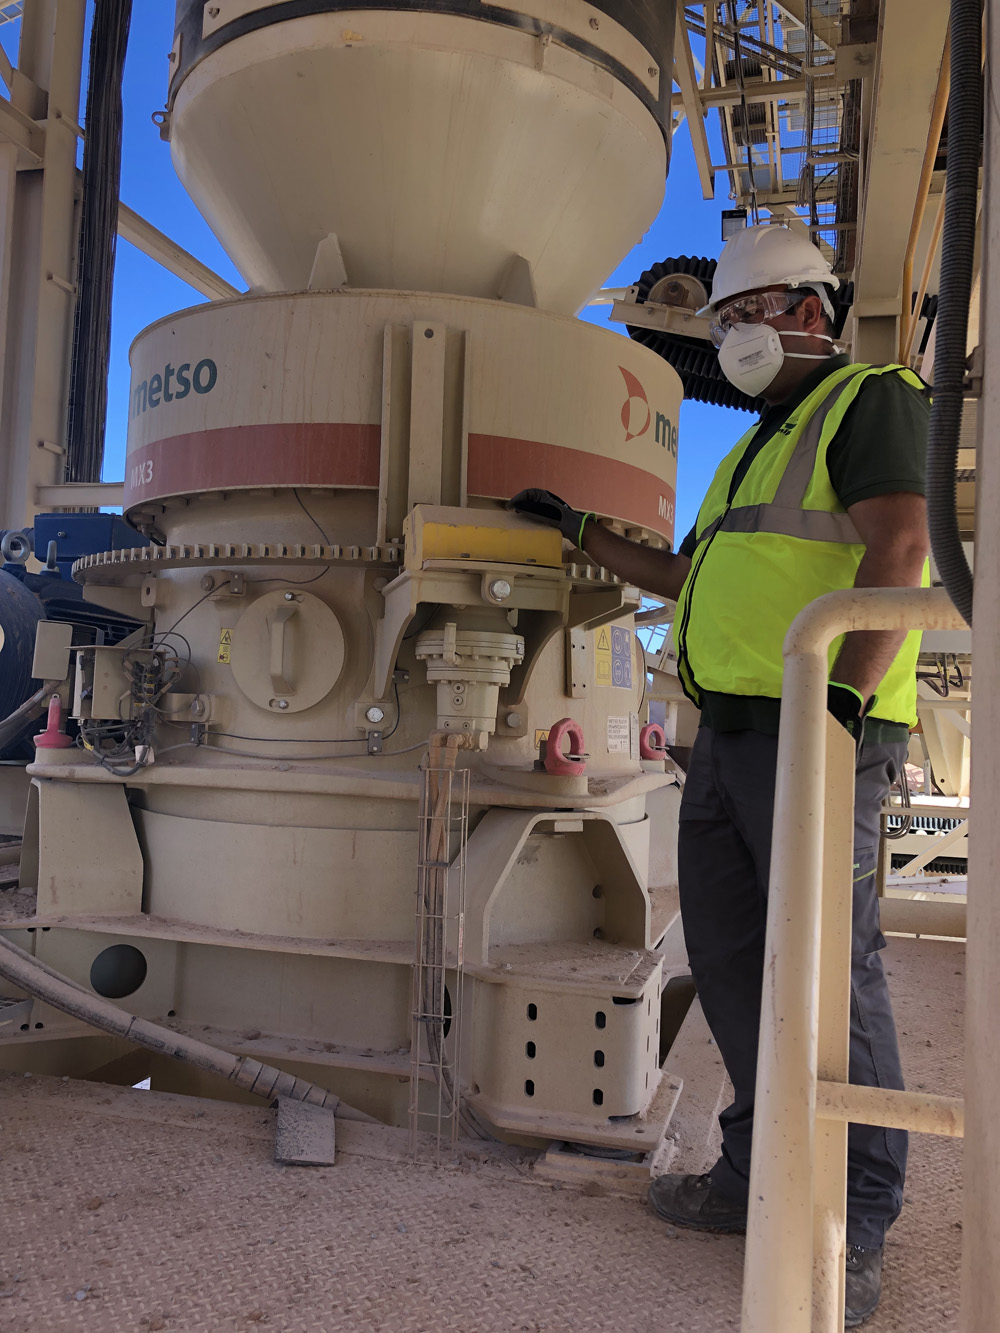 Metso MX3 cone crusher at Emipesa's all-Metso state-of-the-art production plant at Cantera el Poyo Quarry near Teruel, in Aragón, Eastern Spain